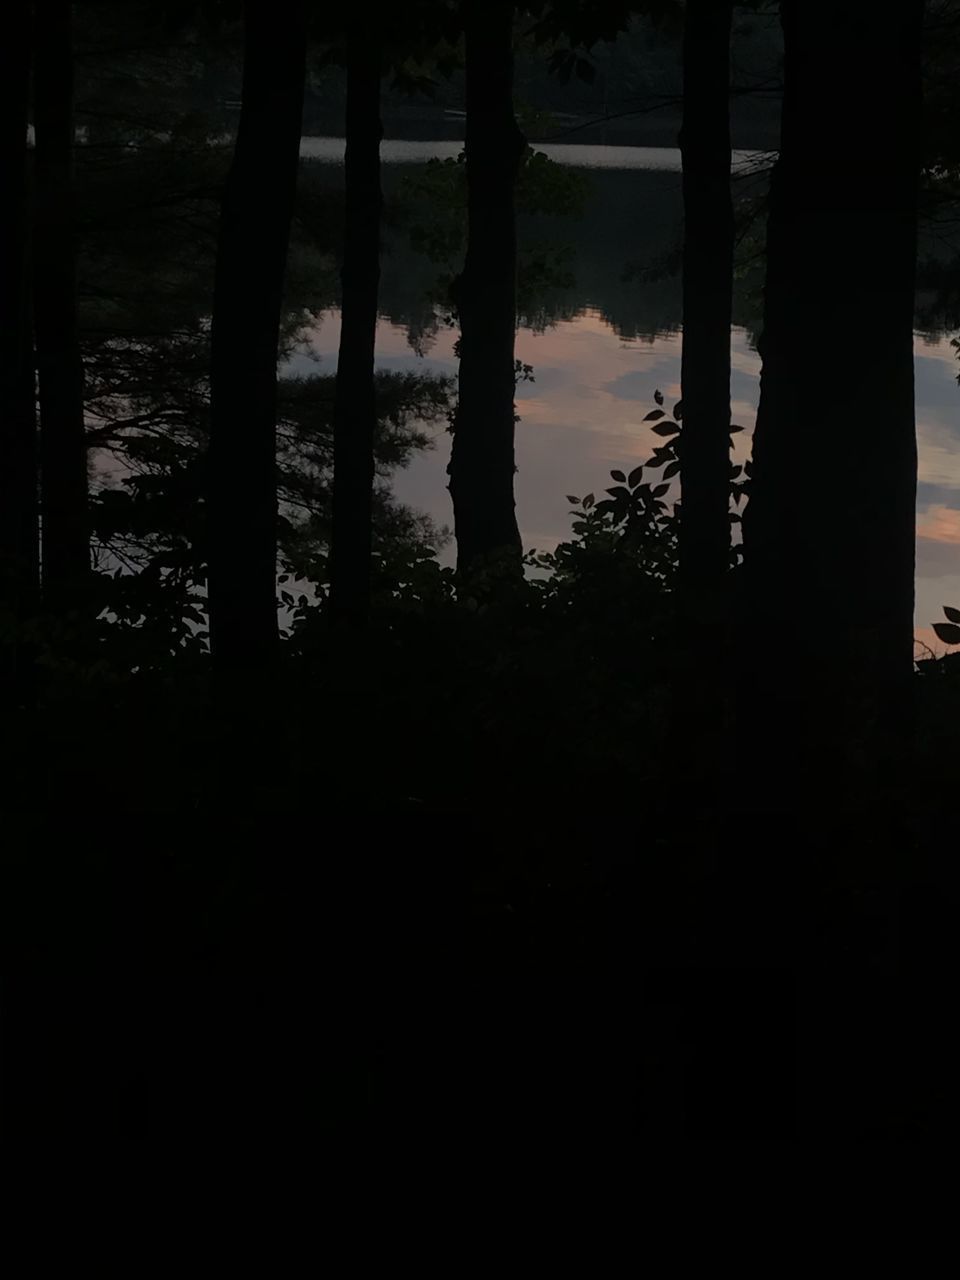 SILHOUETTE TREES BY THE LAKE IN FOREST AGAINST SKY